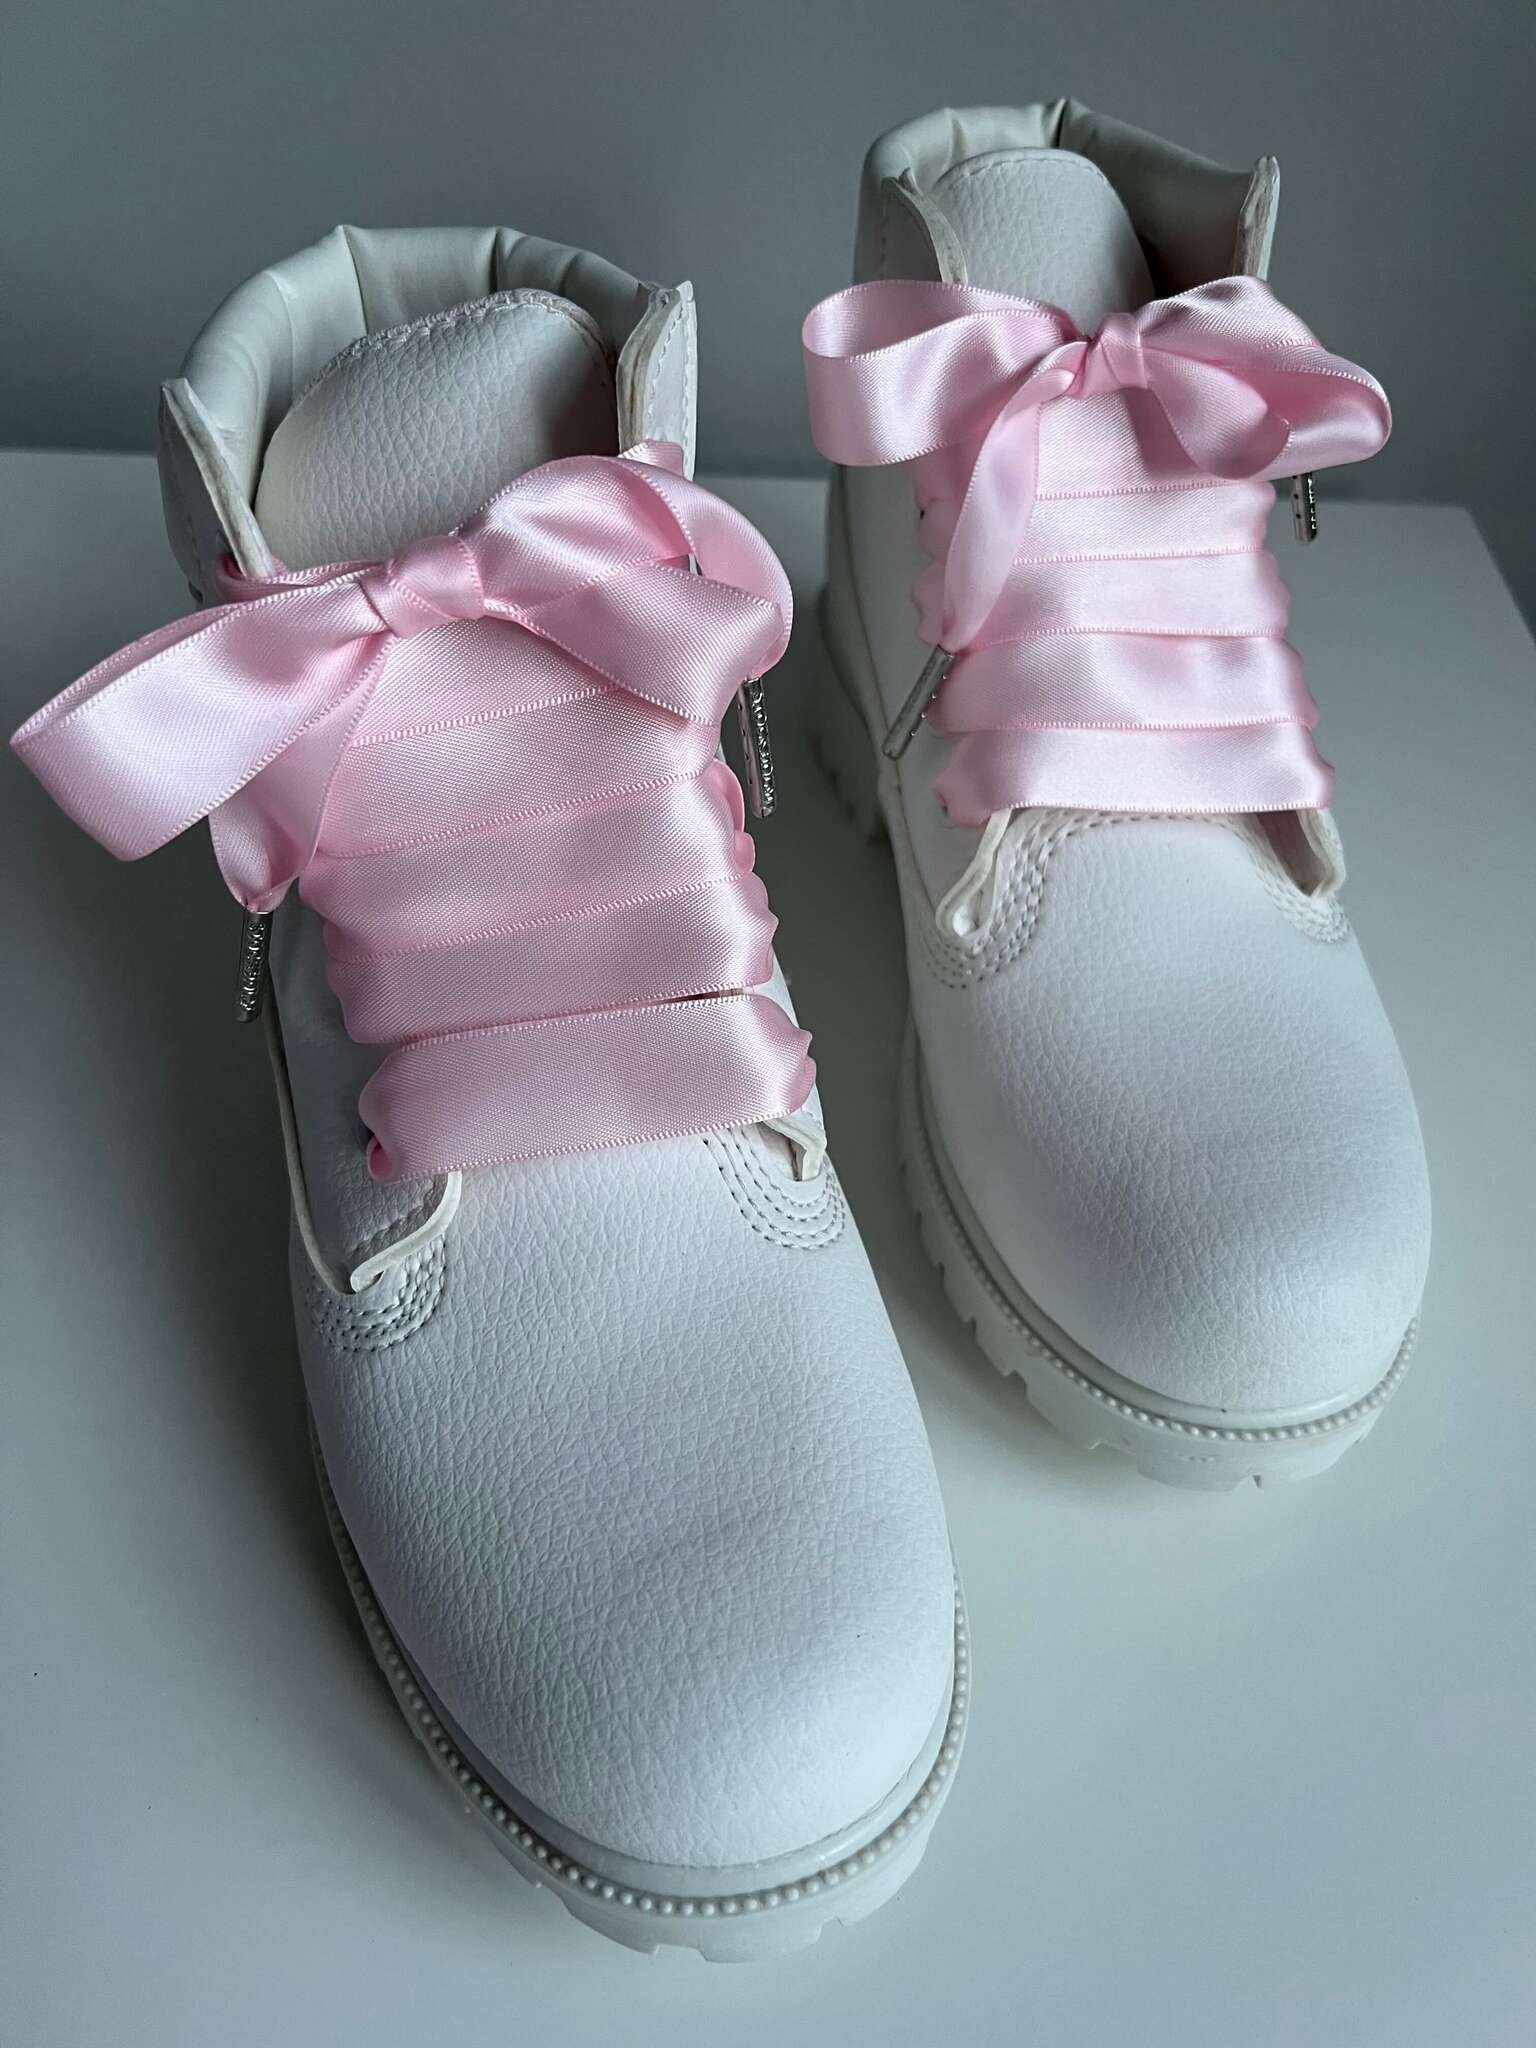 Soft Pink Silk Shoelaces - The Shoelace Brand